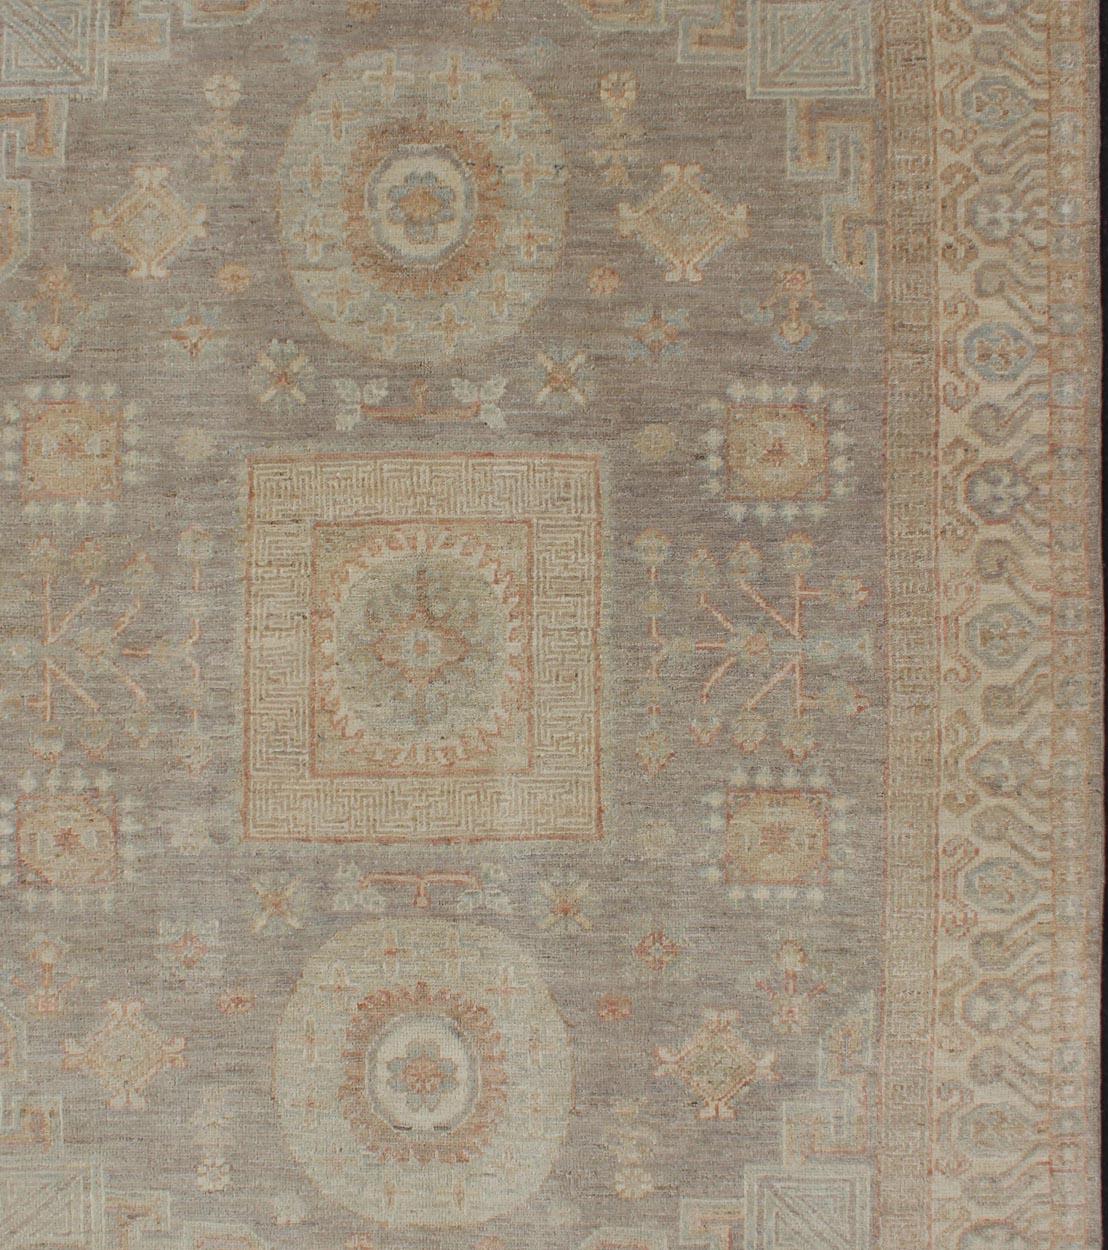 Light color Khotan rug with geometric Medallions in gray, tan, pale green, rust and light blue, rug/MP-1903-10518 country of origin / type: Afghanistan / Khotan

This Khotan features a traditional Samarkand design with circular and square